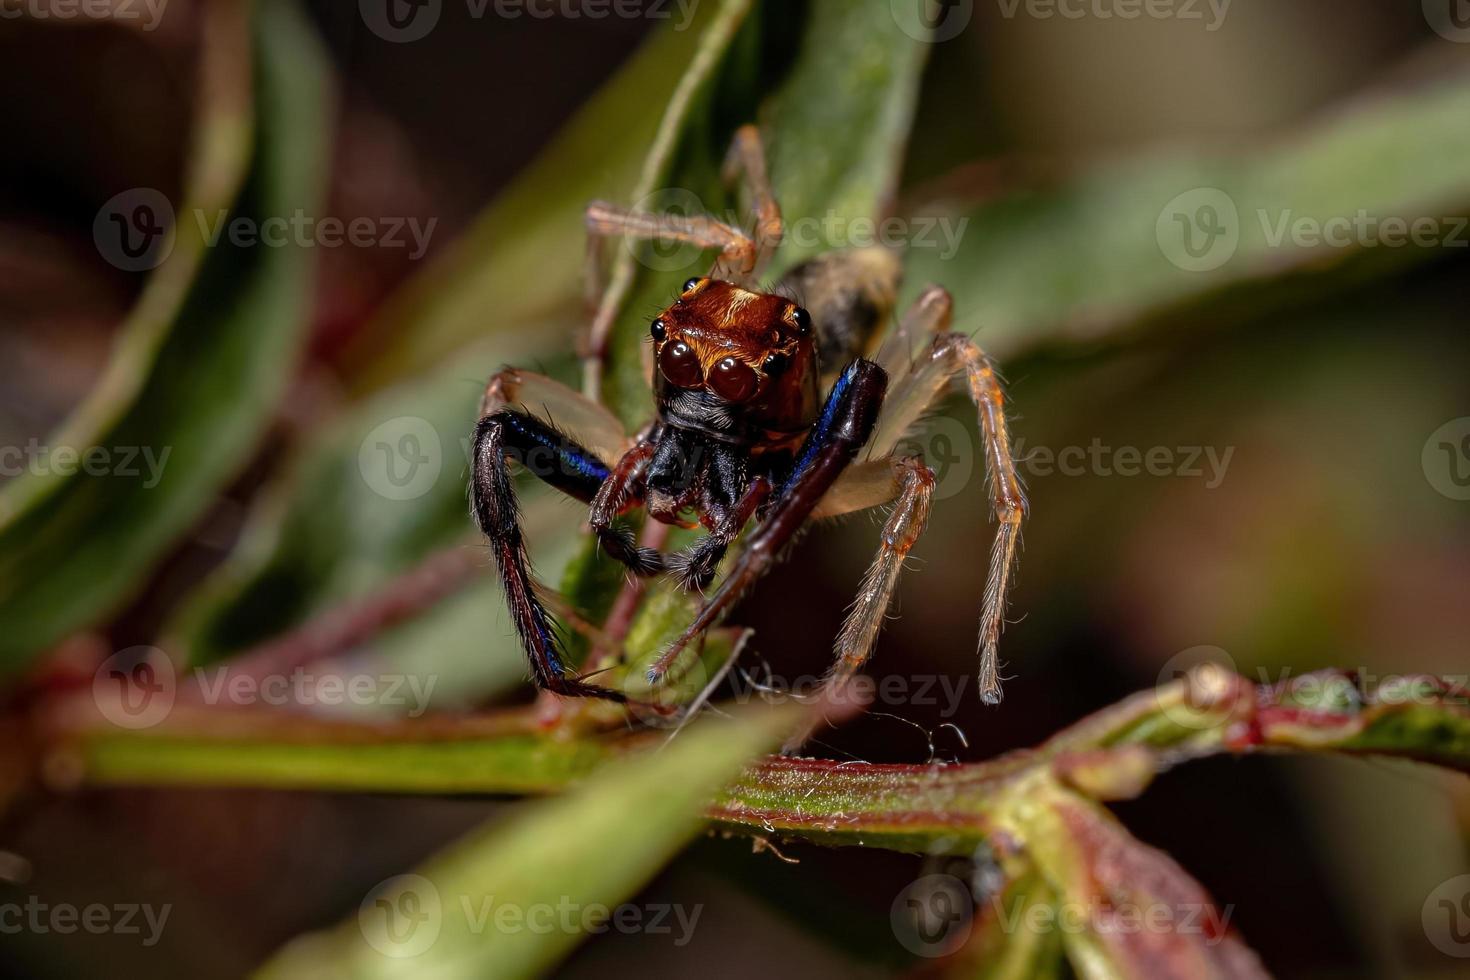 Adult Male Jumping spider photo